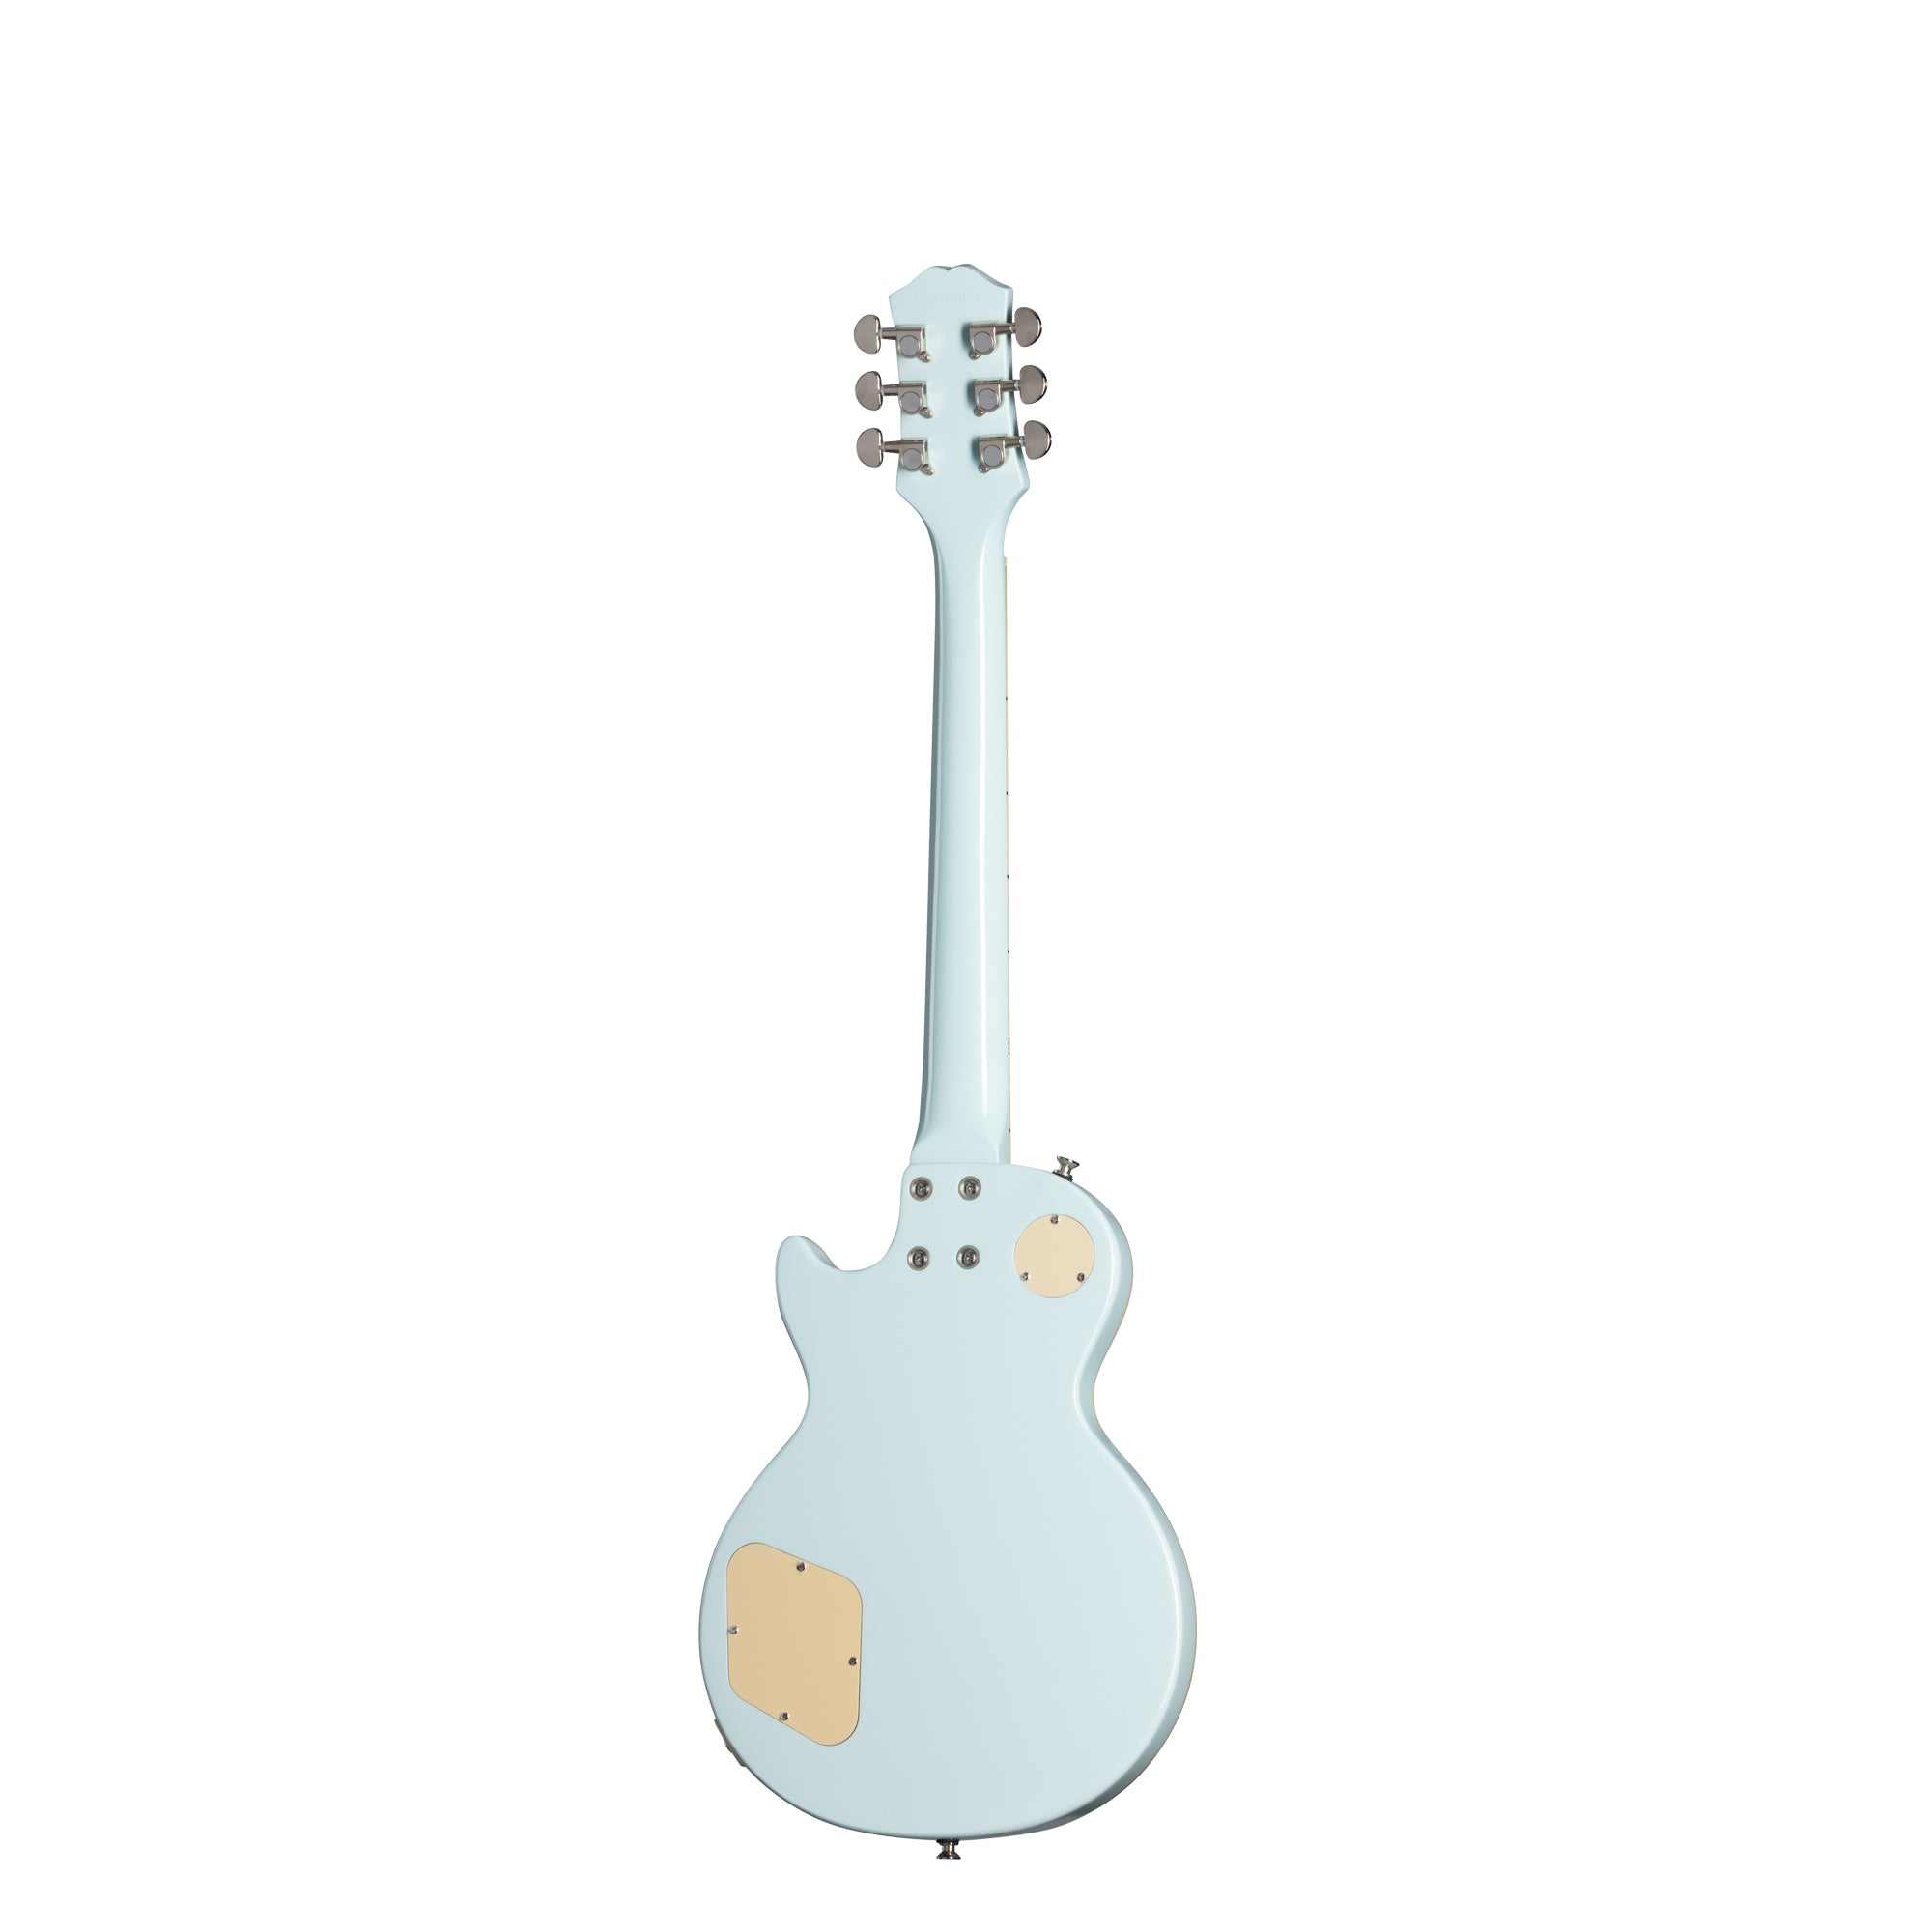 Epiphone ES1PPLPFBNH1 Power Players Les Paul Ice Blue - Incl. Gig bag, Cable, Picks